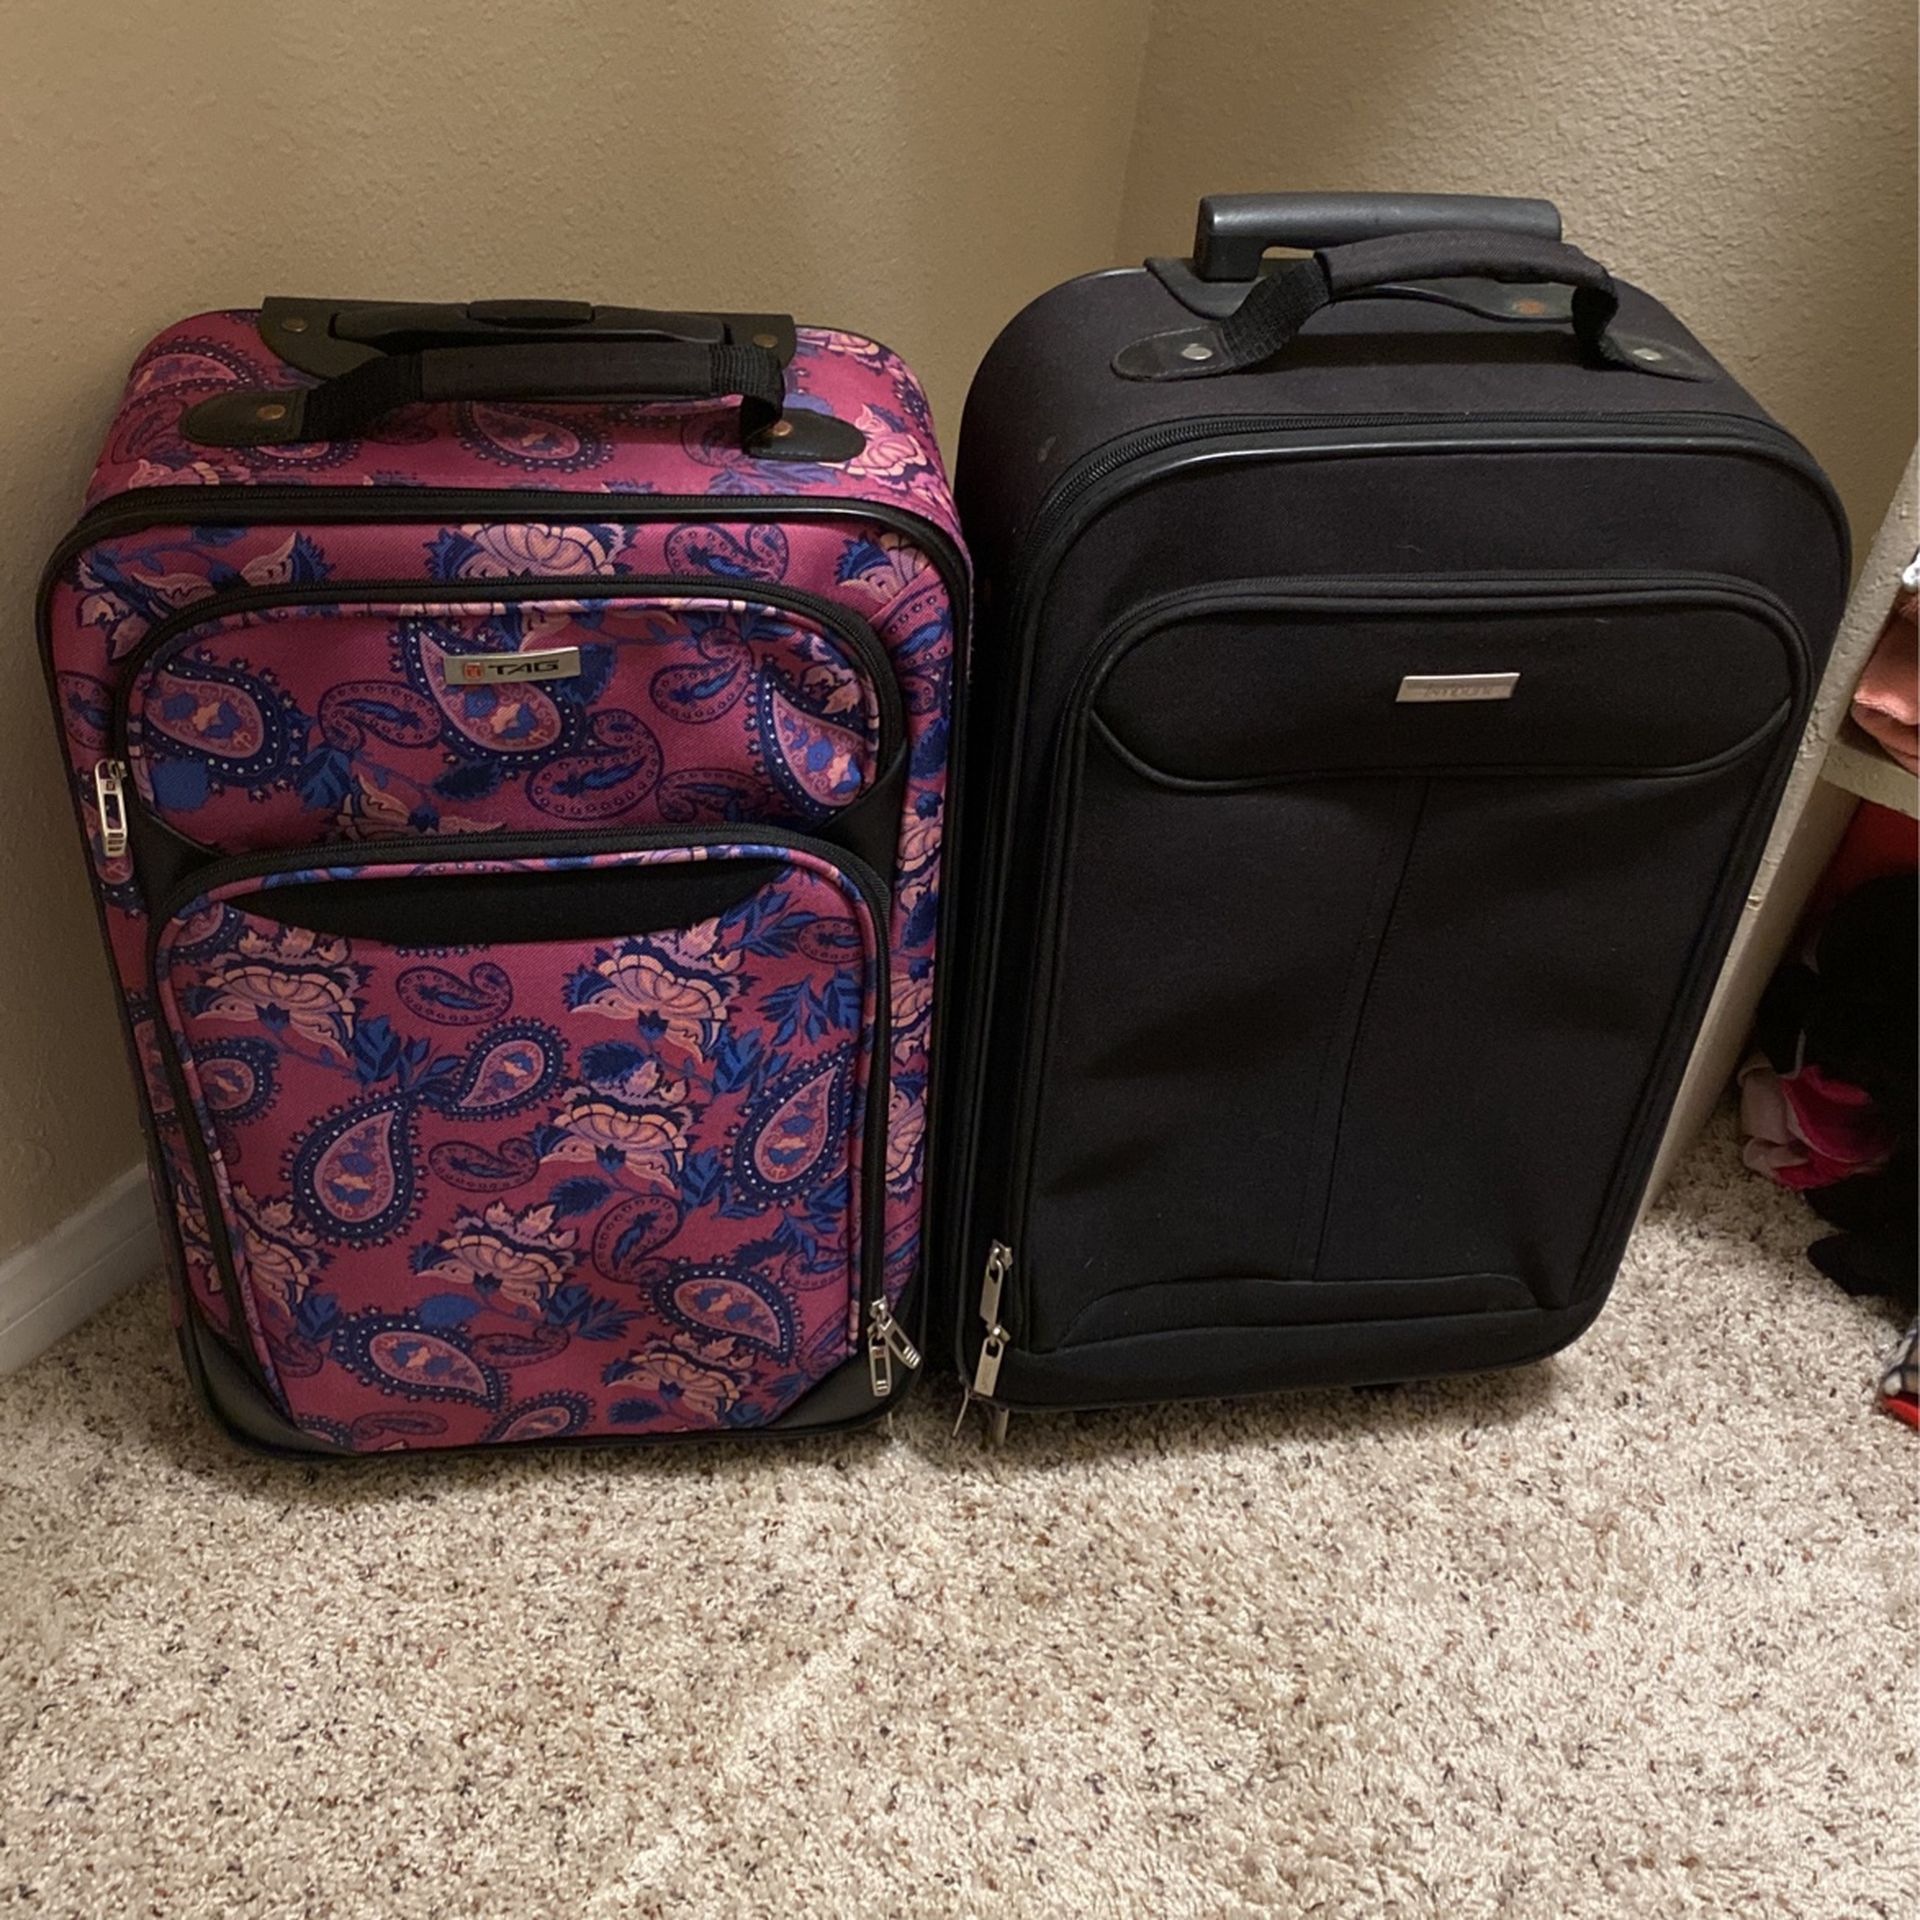 TAG / EMBARK SUITCASE / CARRY ON LUGGAGE TSA APPROVED FOR TRAVEL